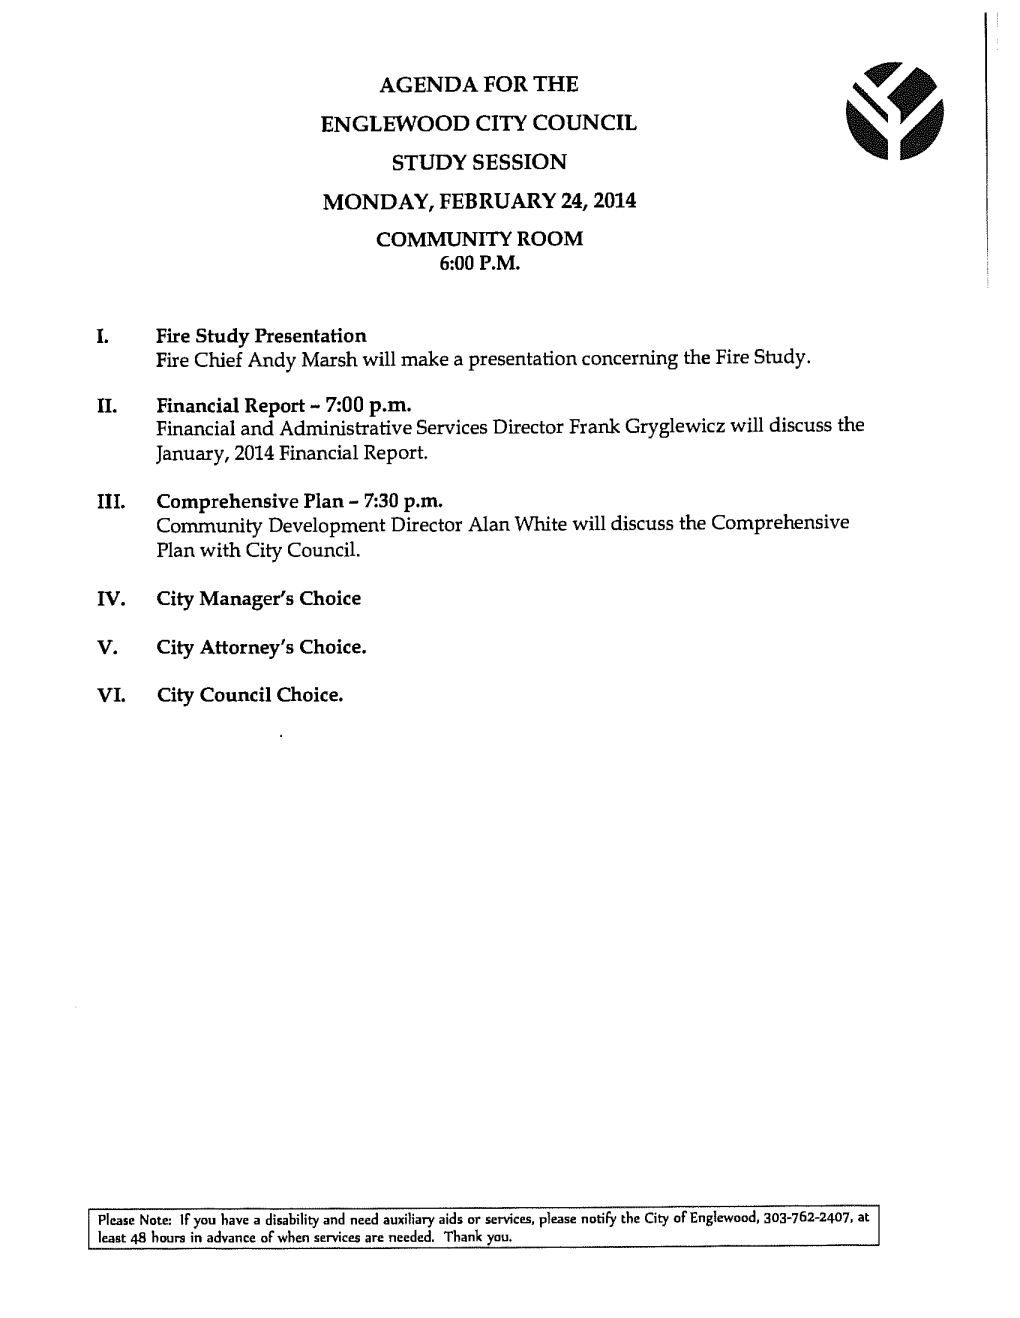 Agenda for the Englewood City Council Study Session Monday, February 24,2014 Community Room 6:00P.M